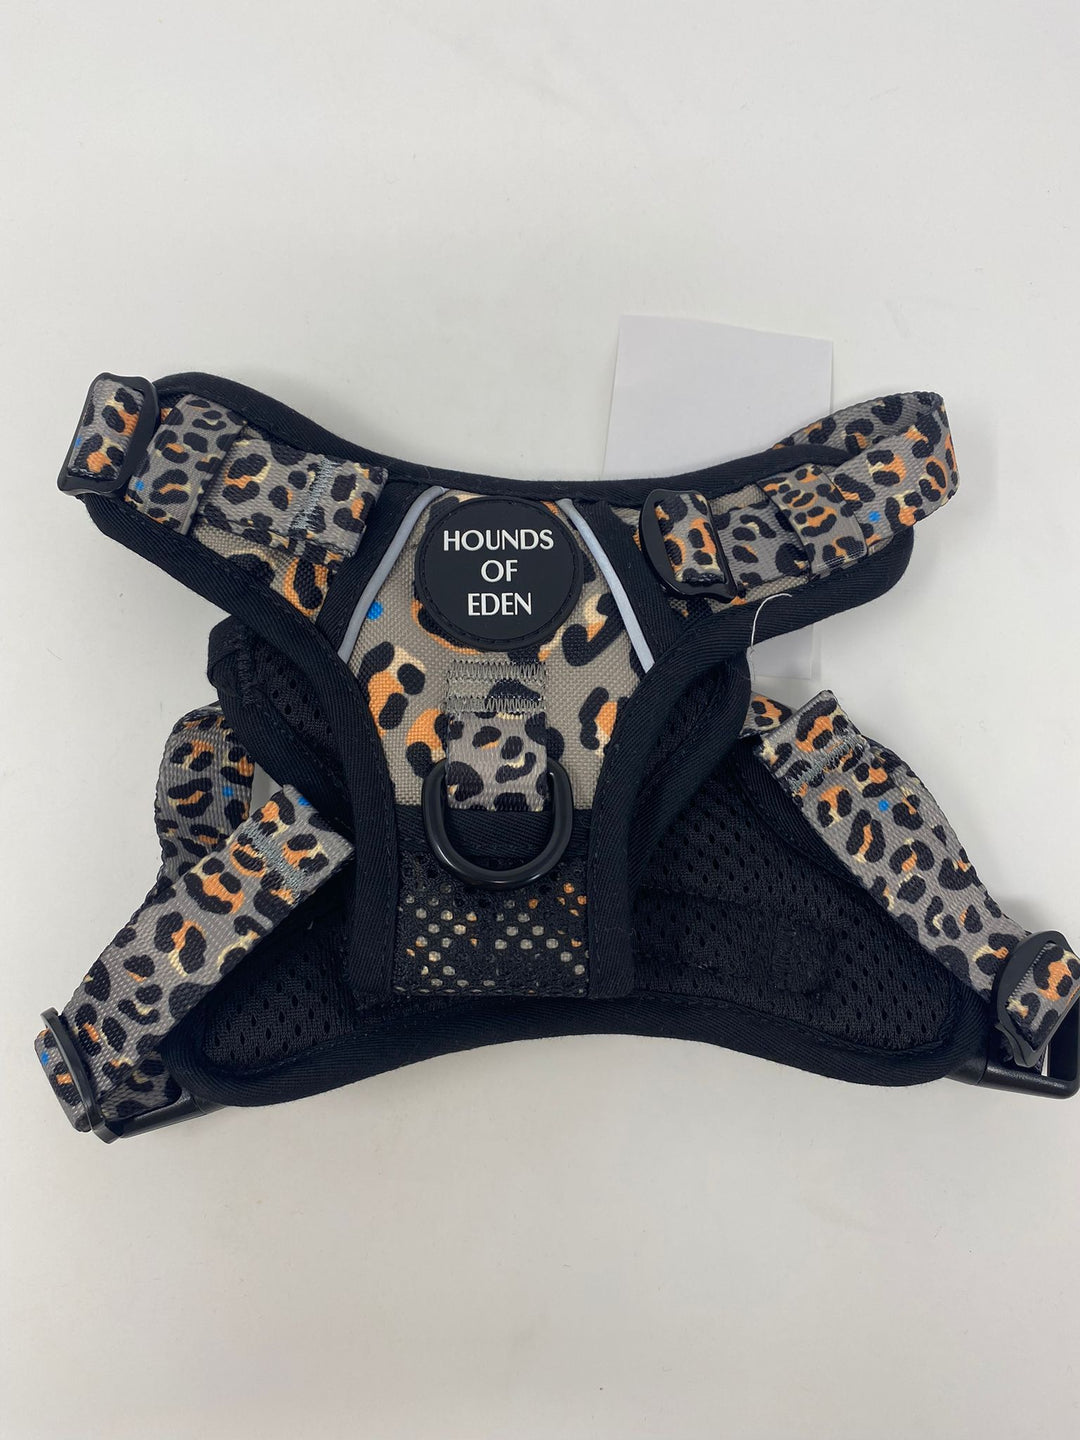 Outlet - SMALL SUPAW STRONG™ 'STEEL LEOPARD' UTILITY HARNESS - 0096